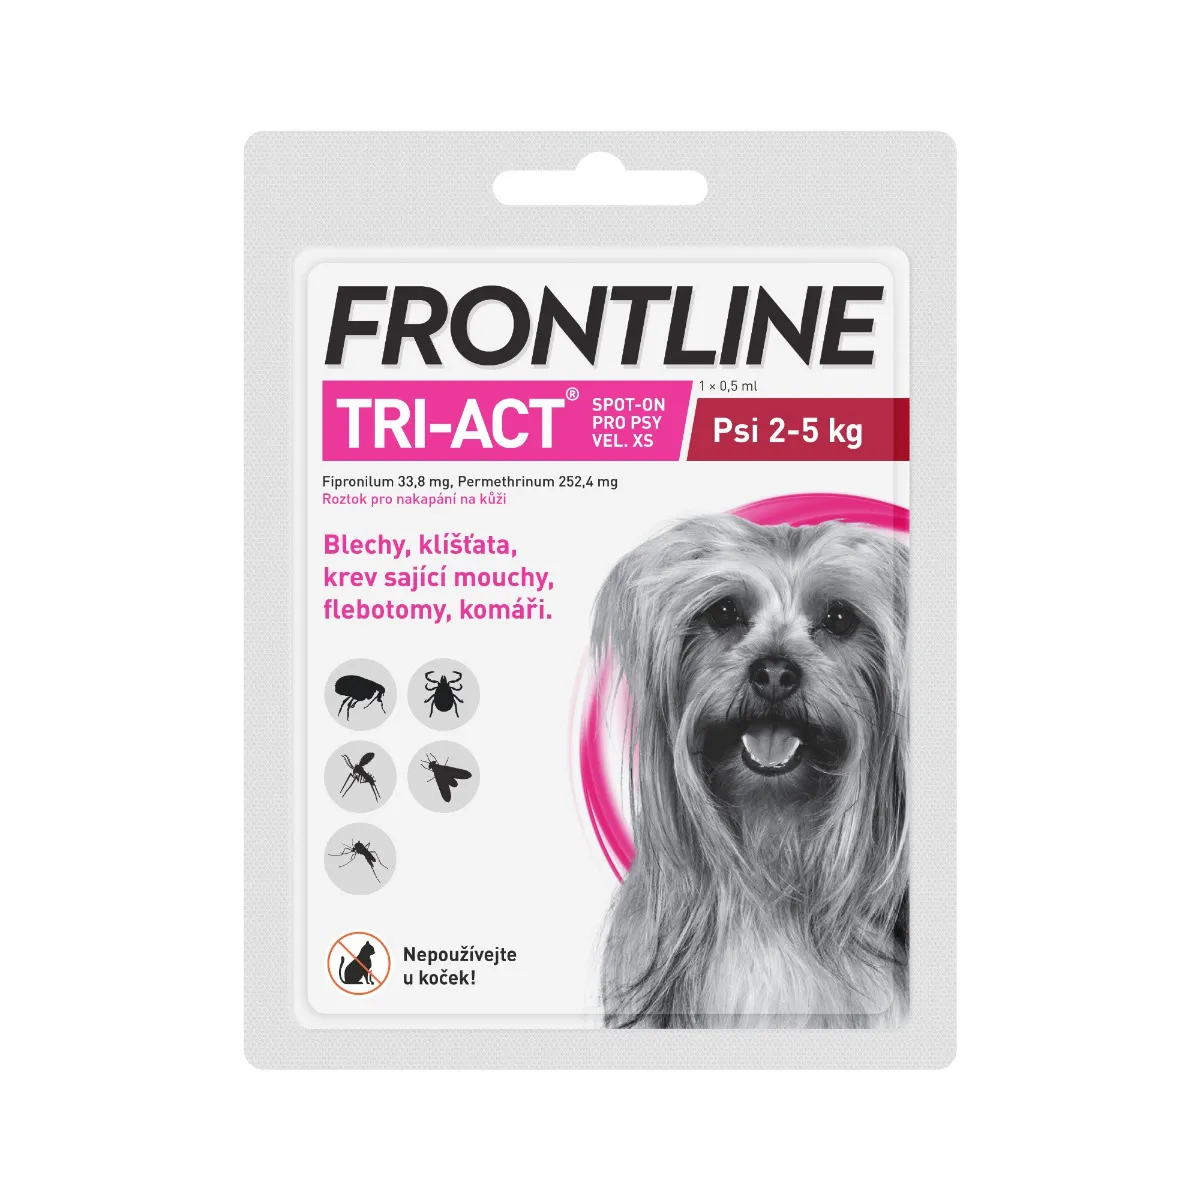 FRONTLINE TRI-ACT pro psy 2-5 kg (XS)